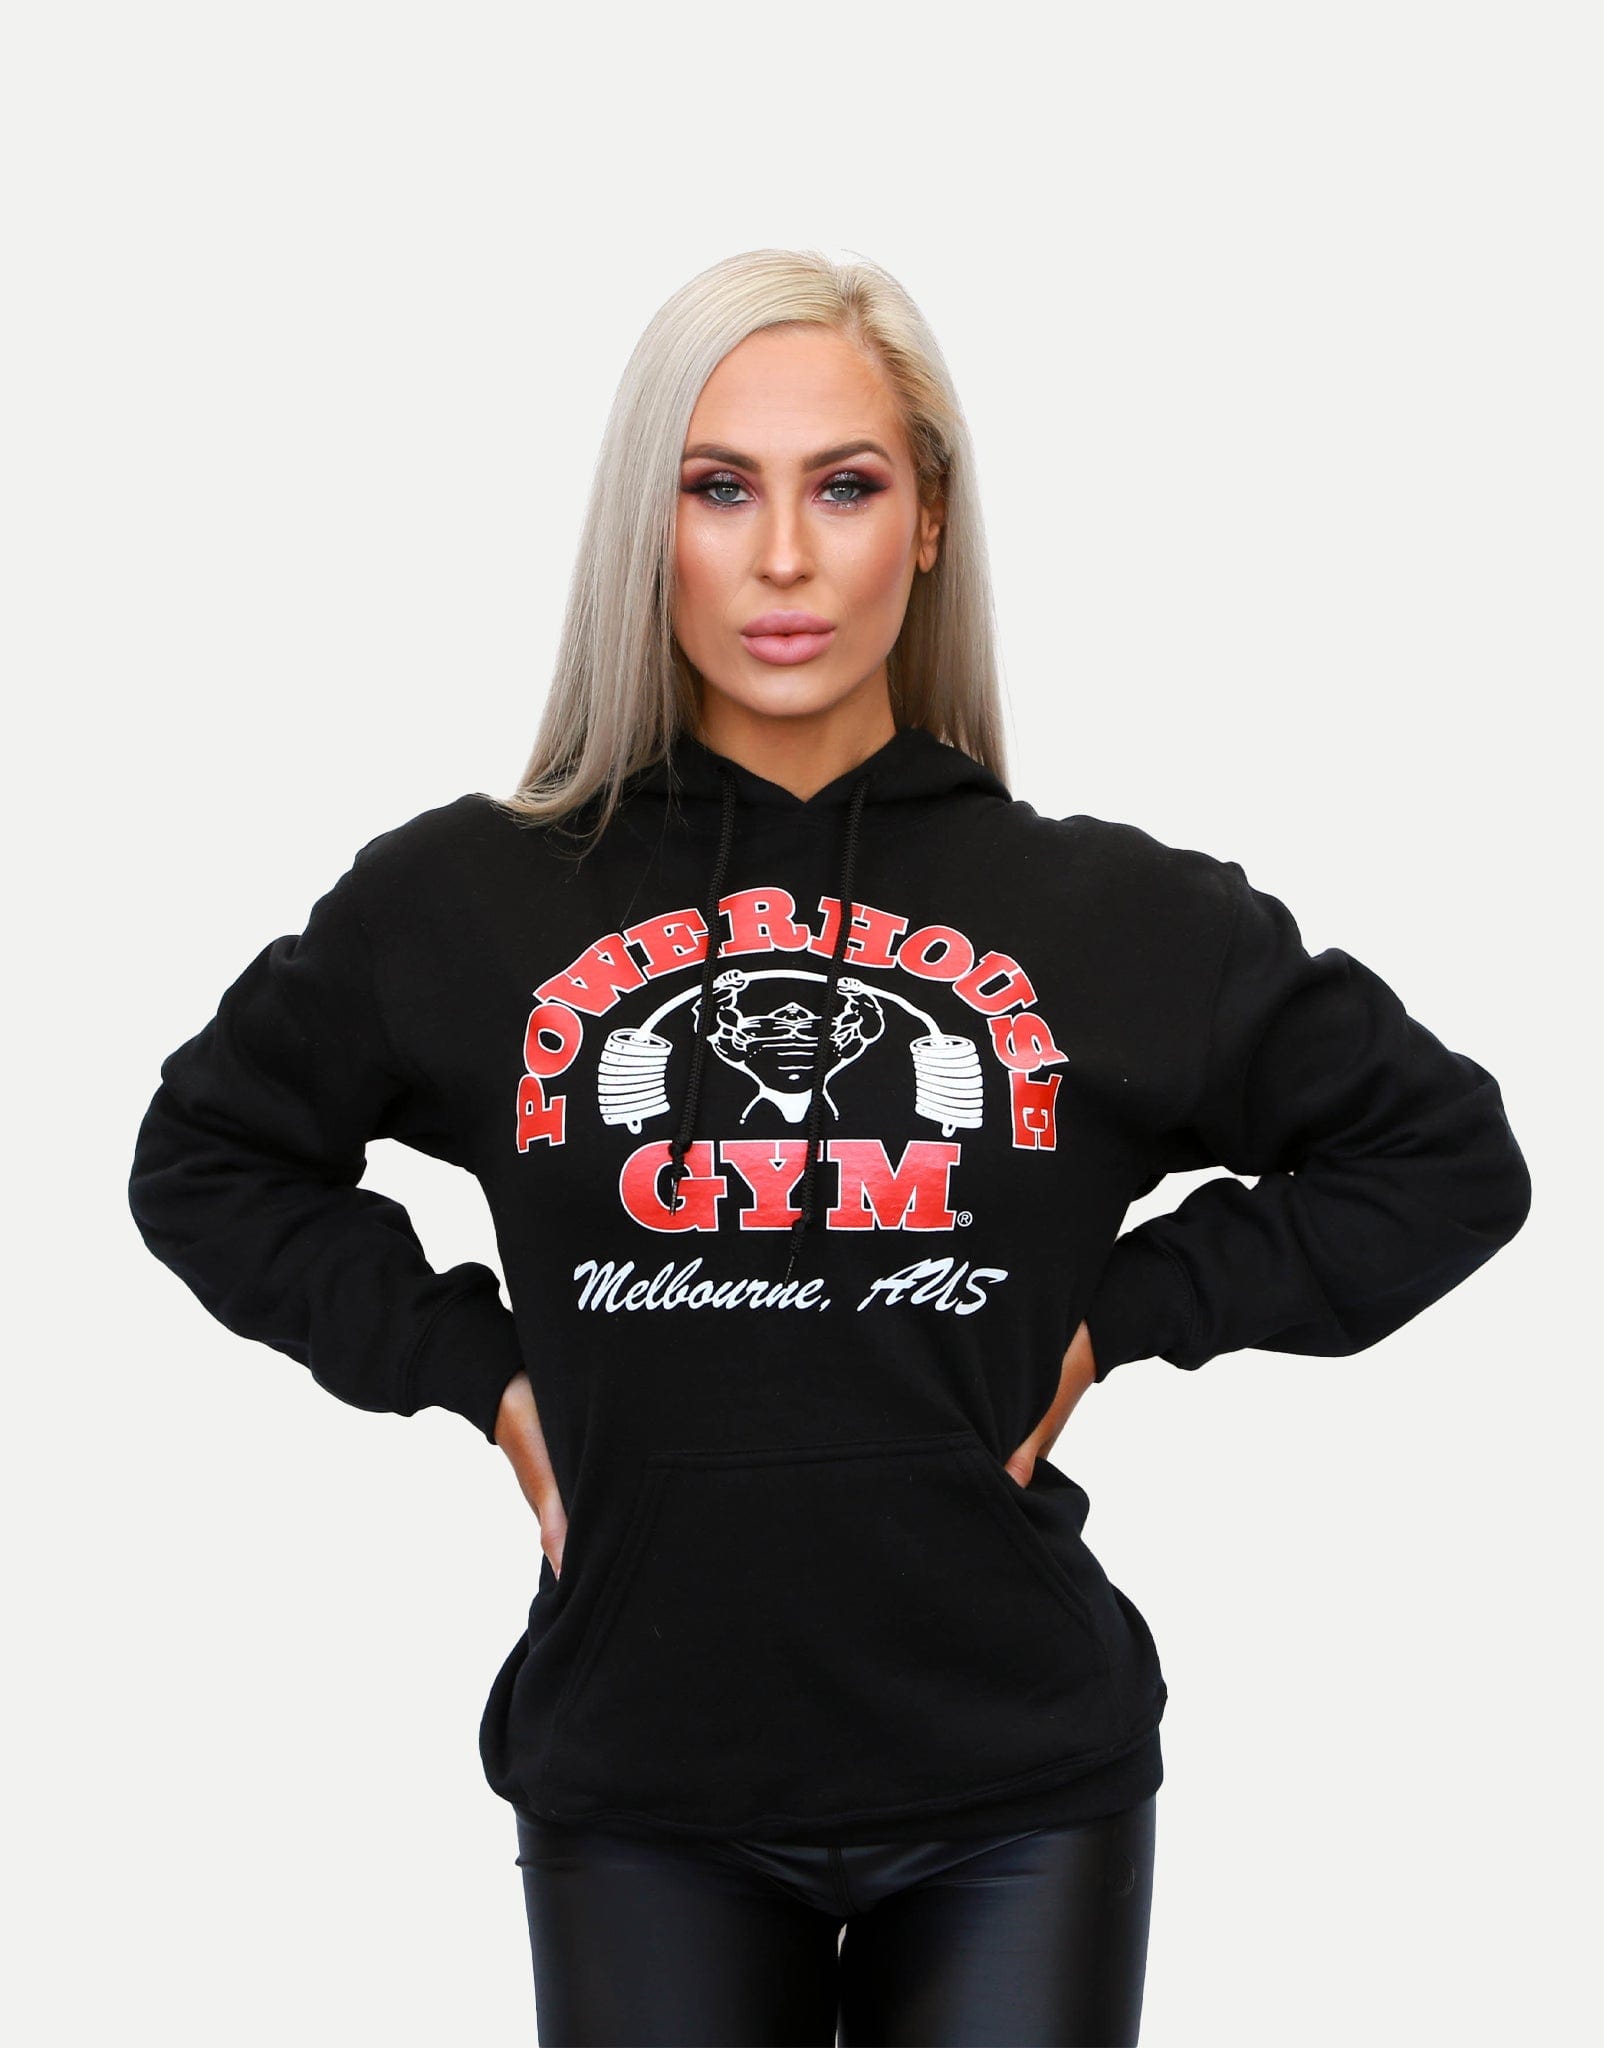 Powerhouse Gym Pro Shop Small Hoodie Black/Red